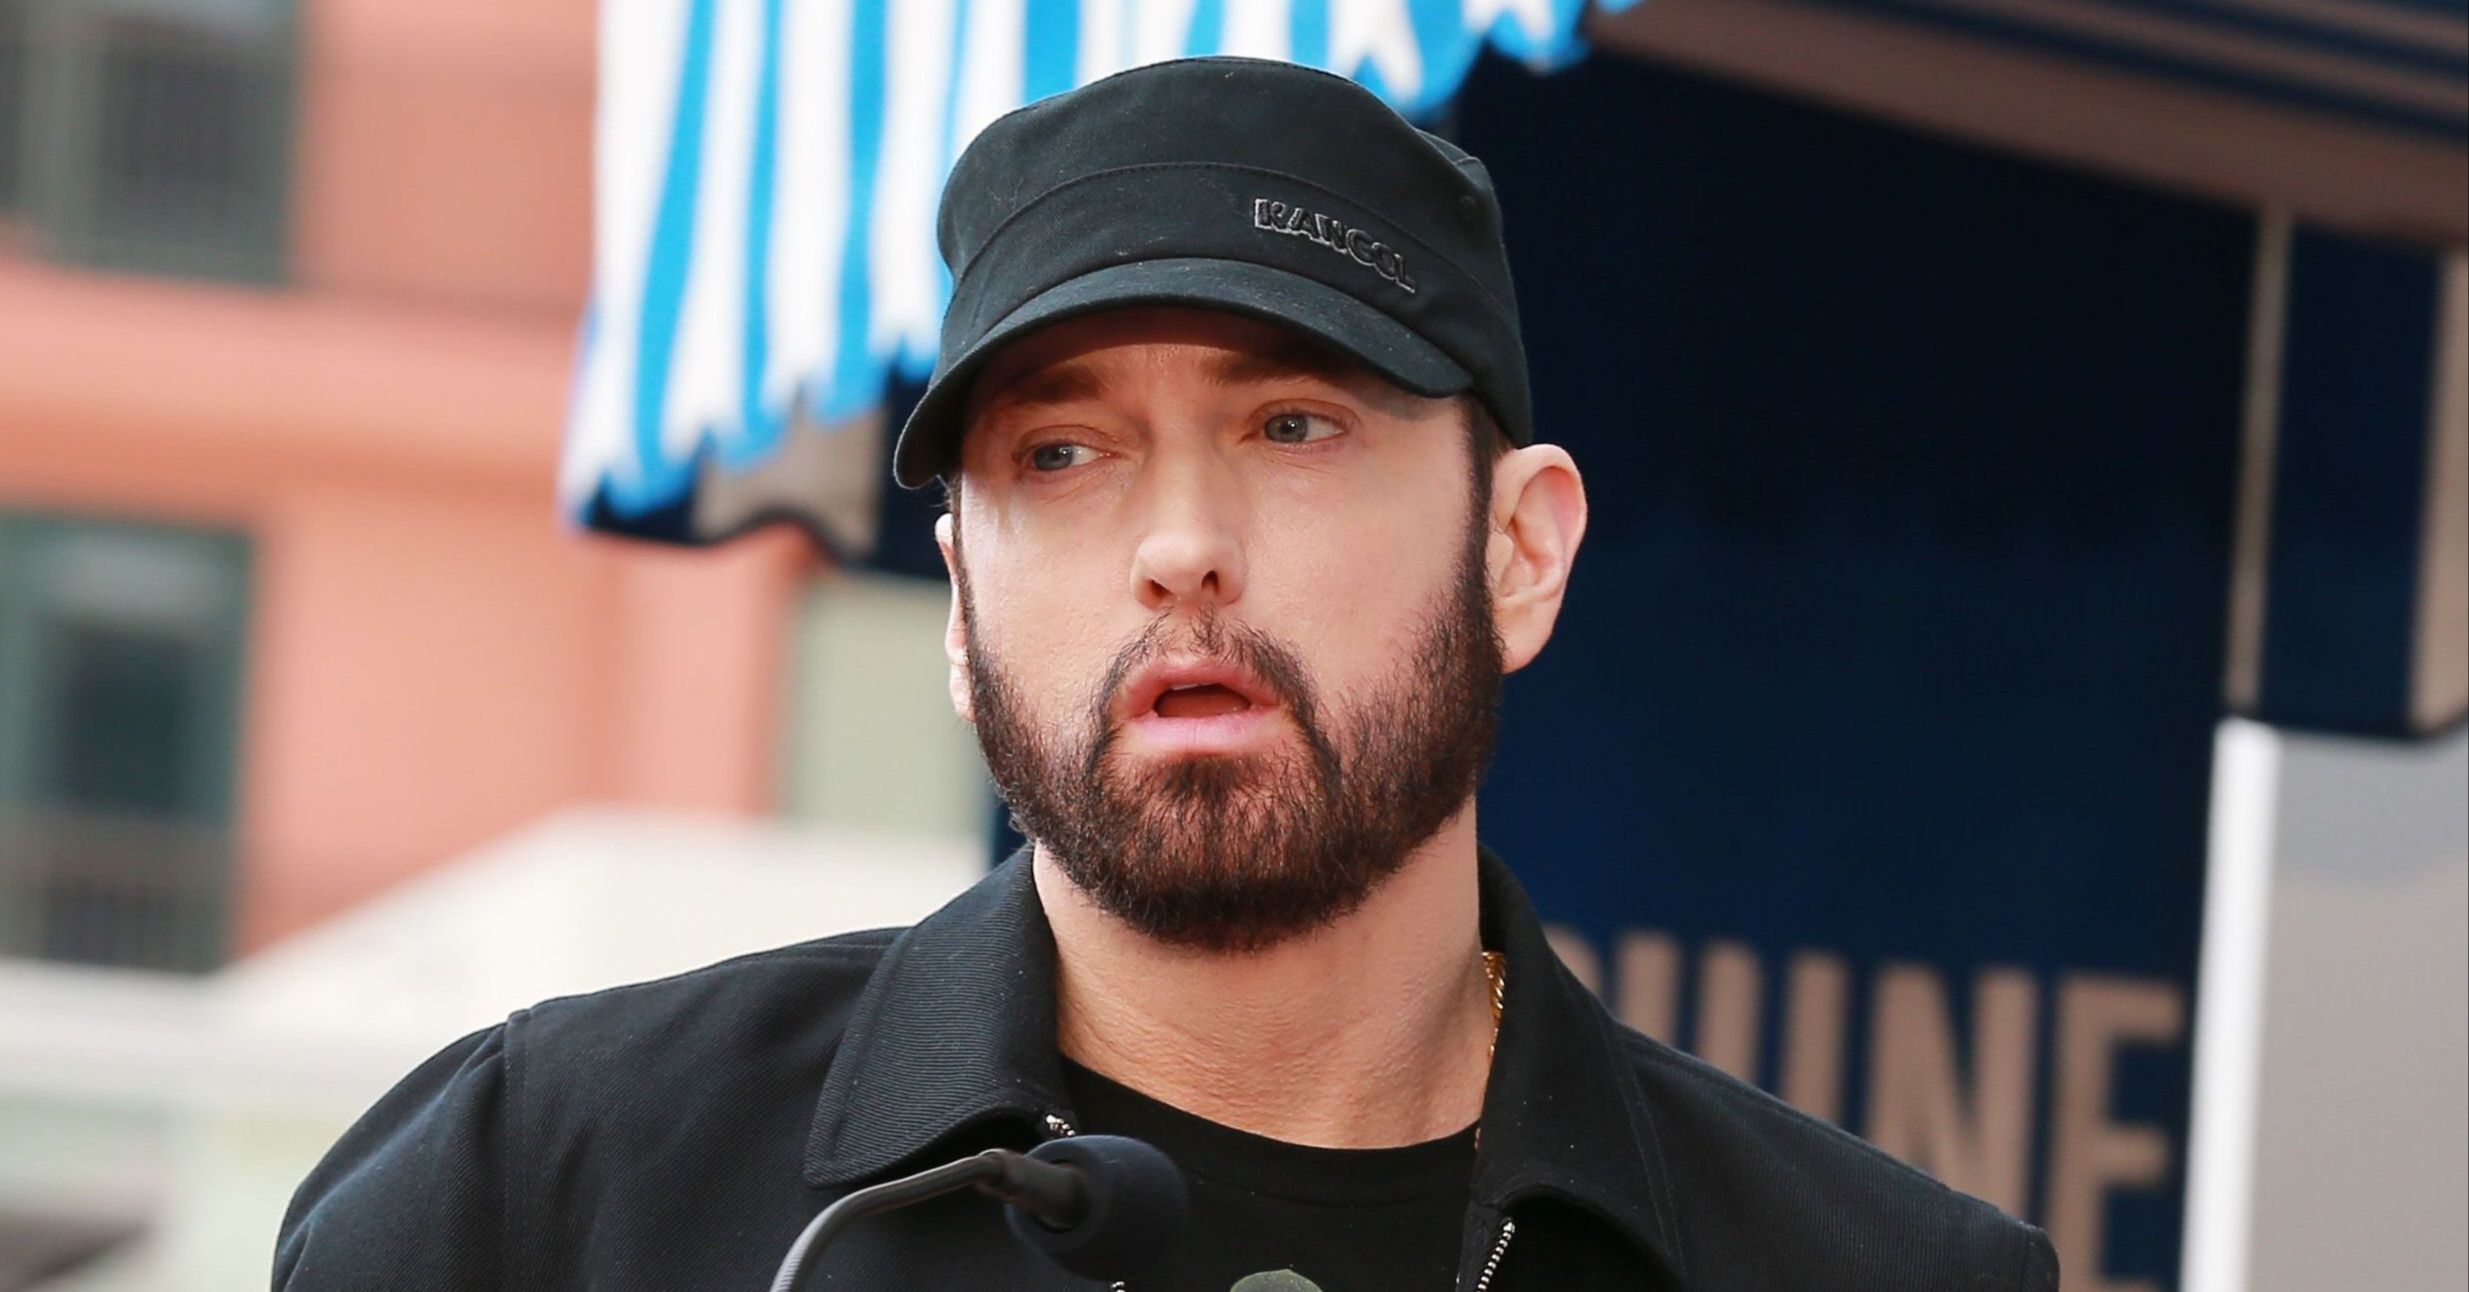 The Message 'RIP Eminem' Trended and People Thought He Died